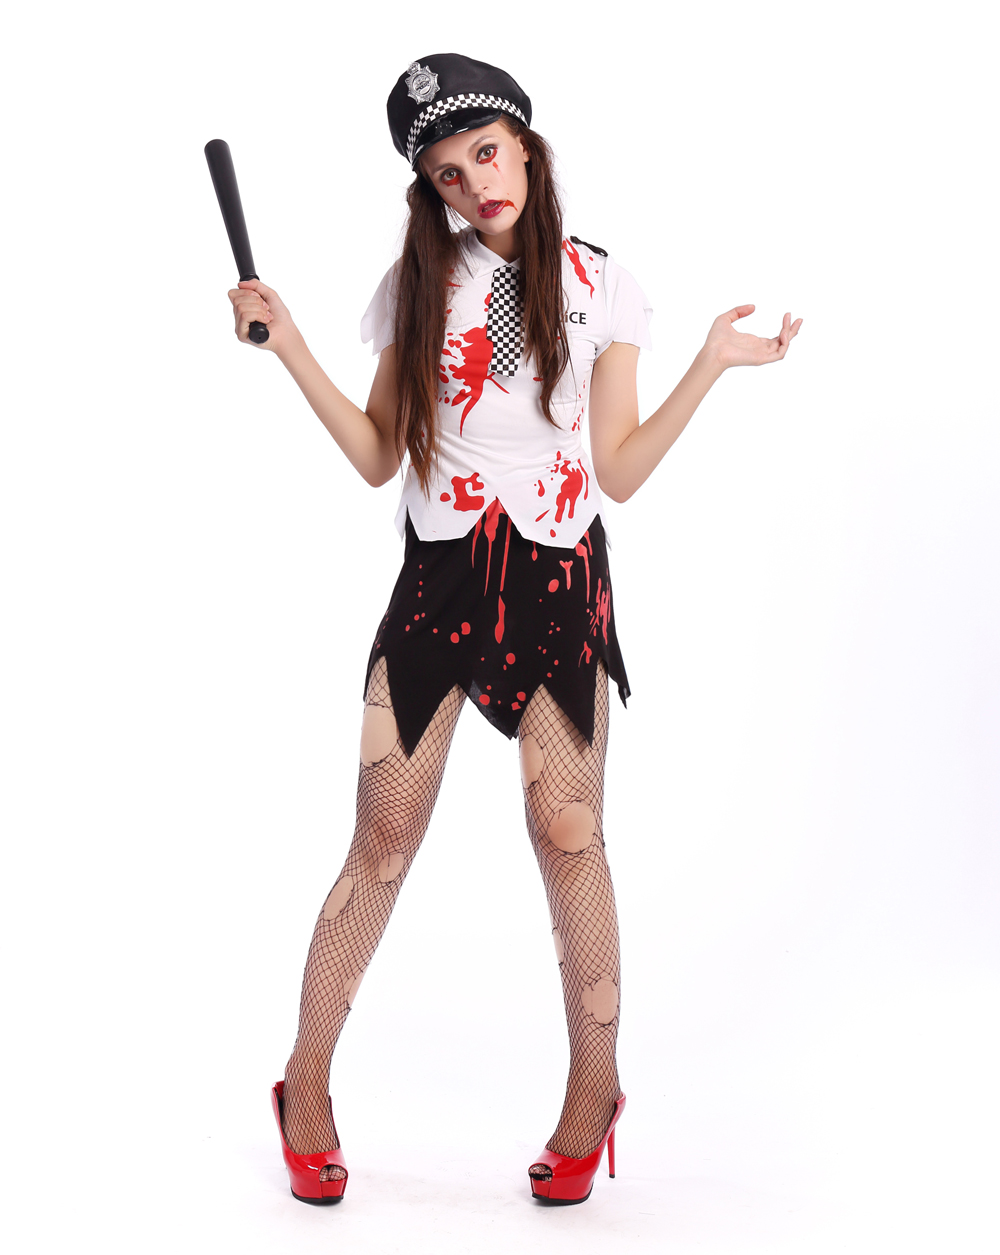 F1689 bloody women zombie police costume,it comes with hat,topwear,skirt